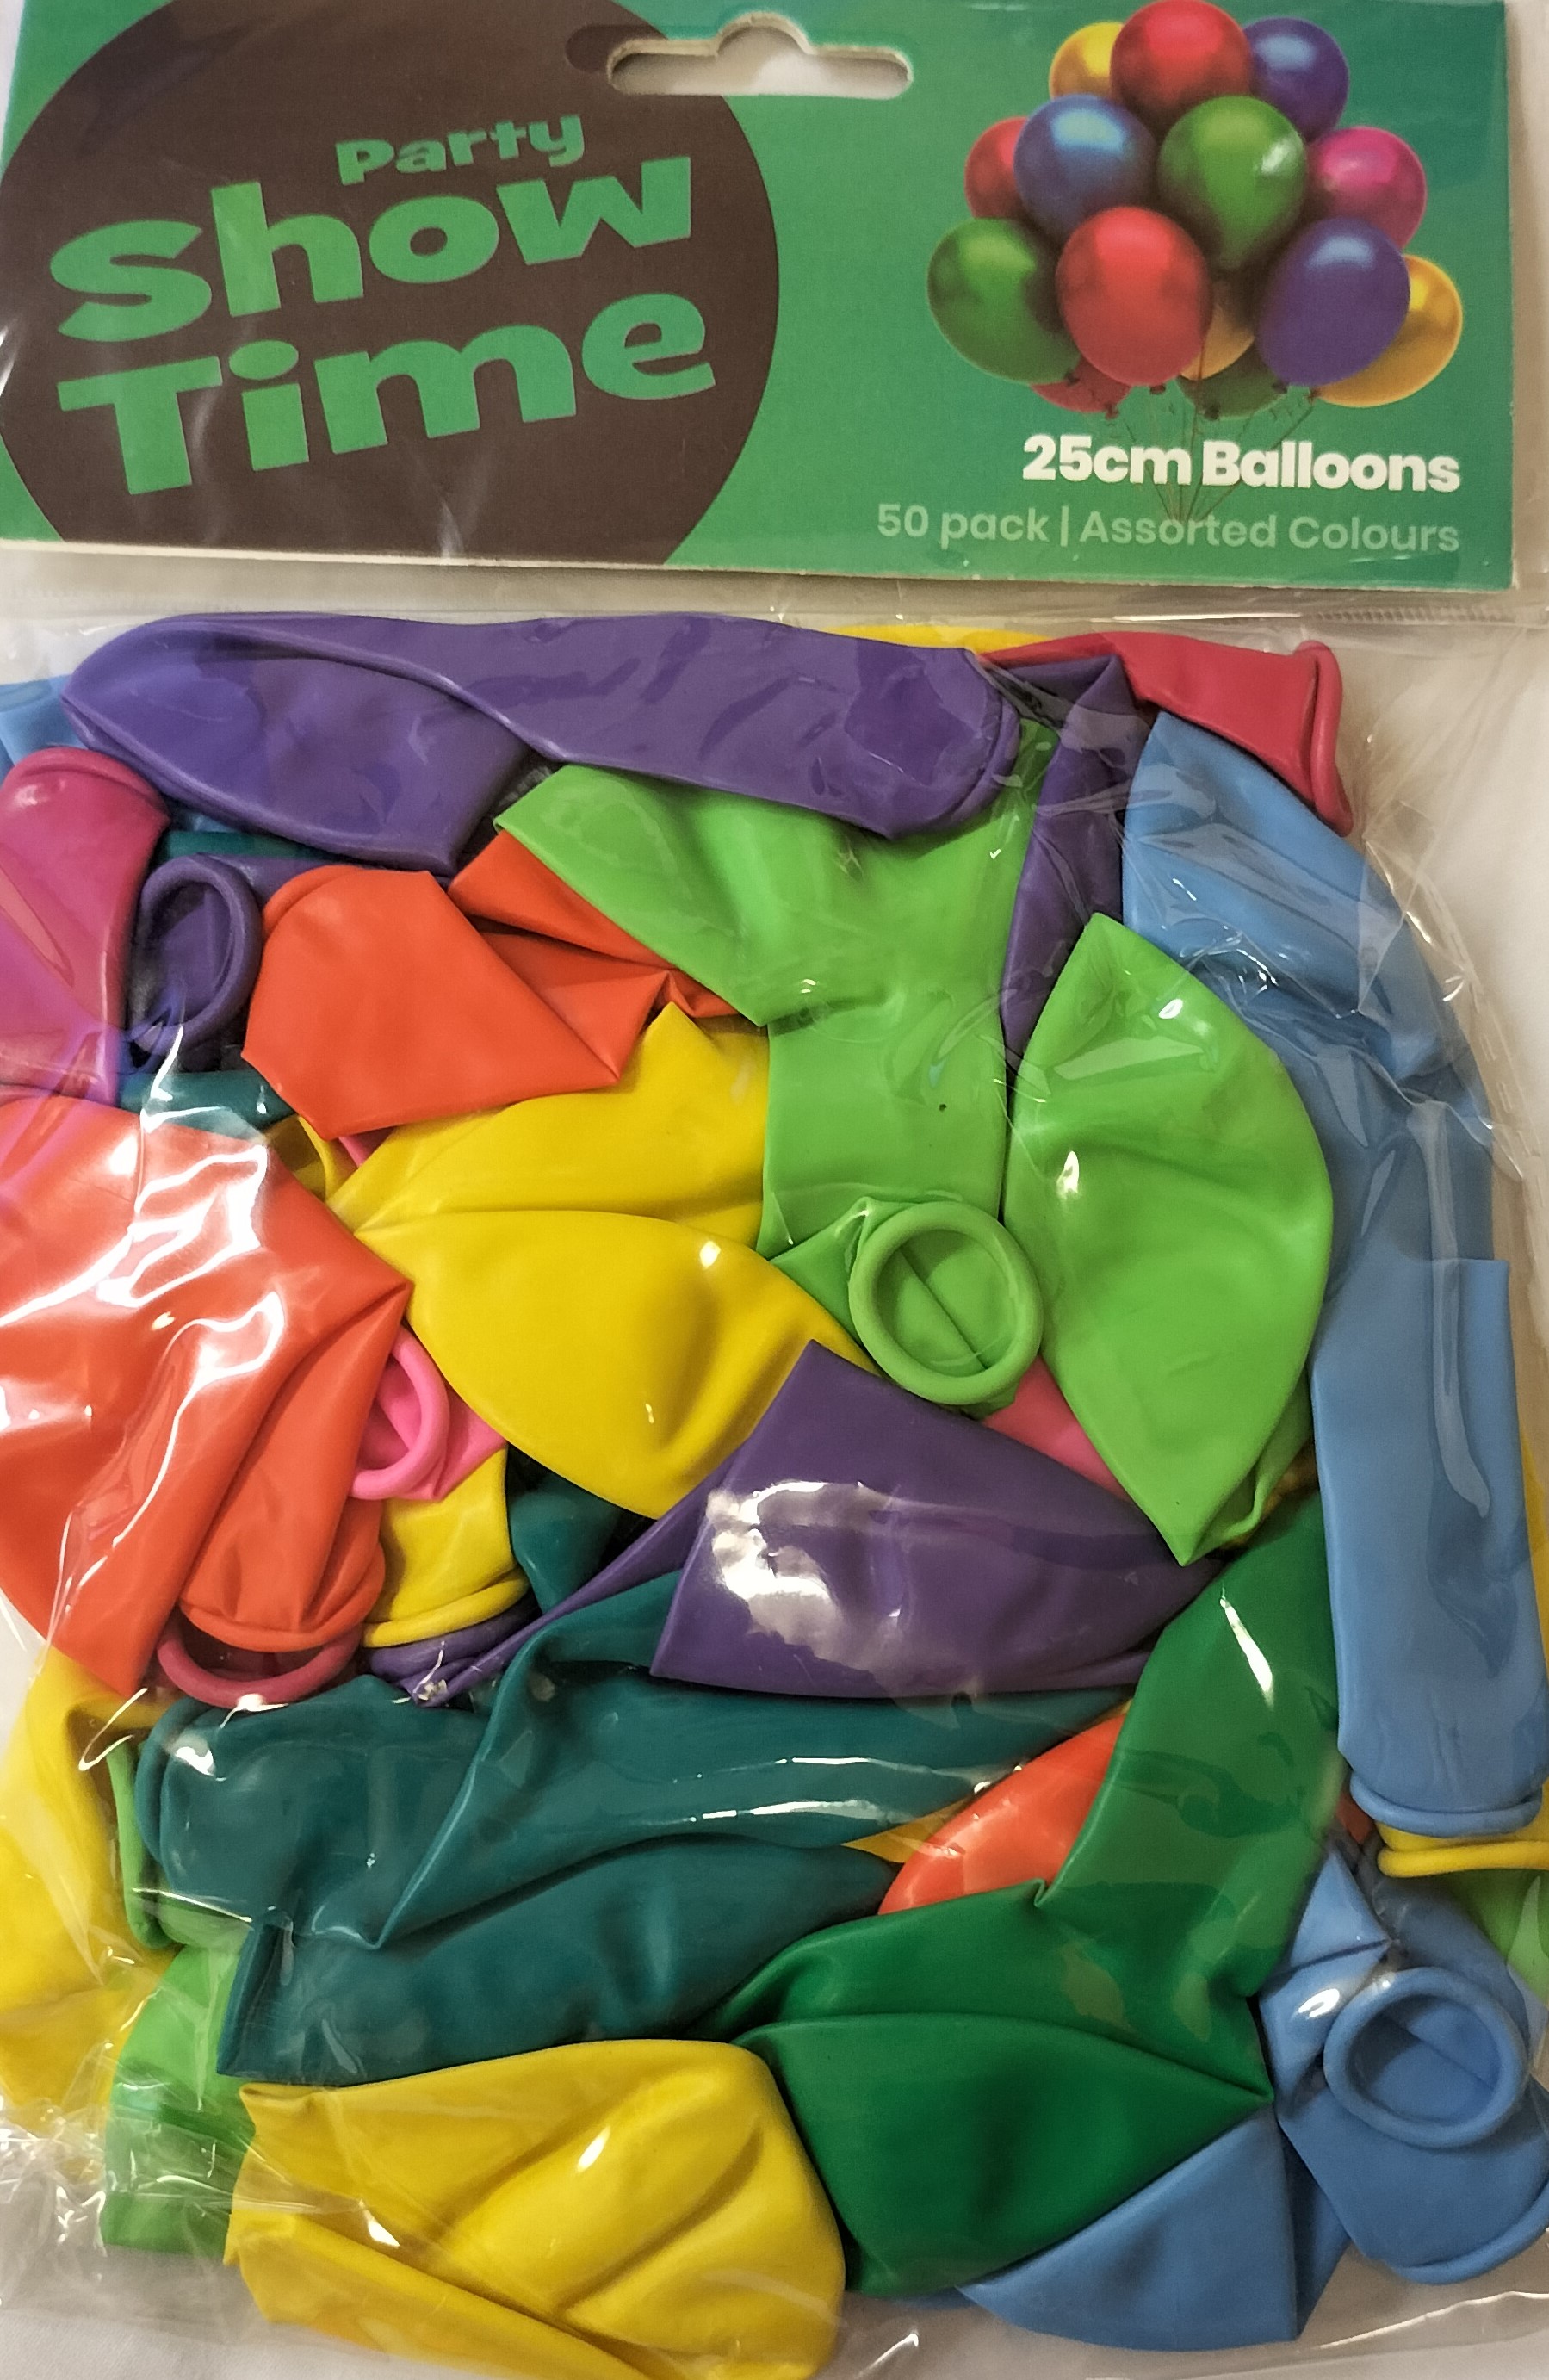 Balloons 25cm Round Asst Cols Pack of 50